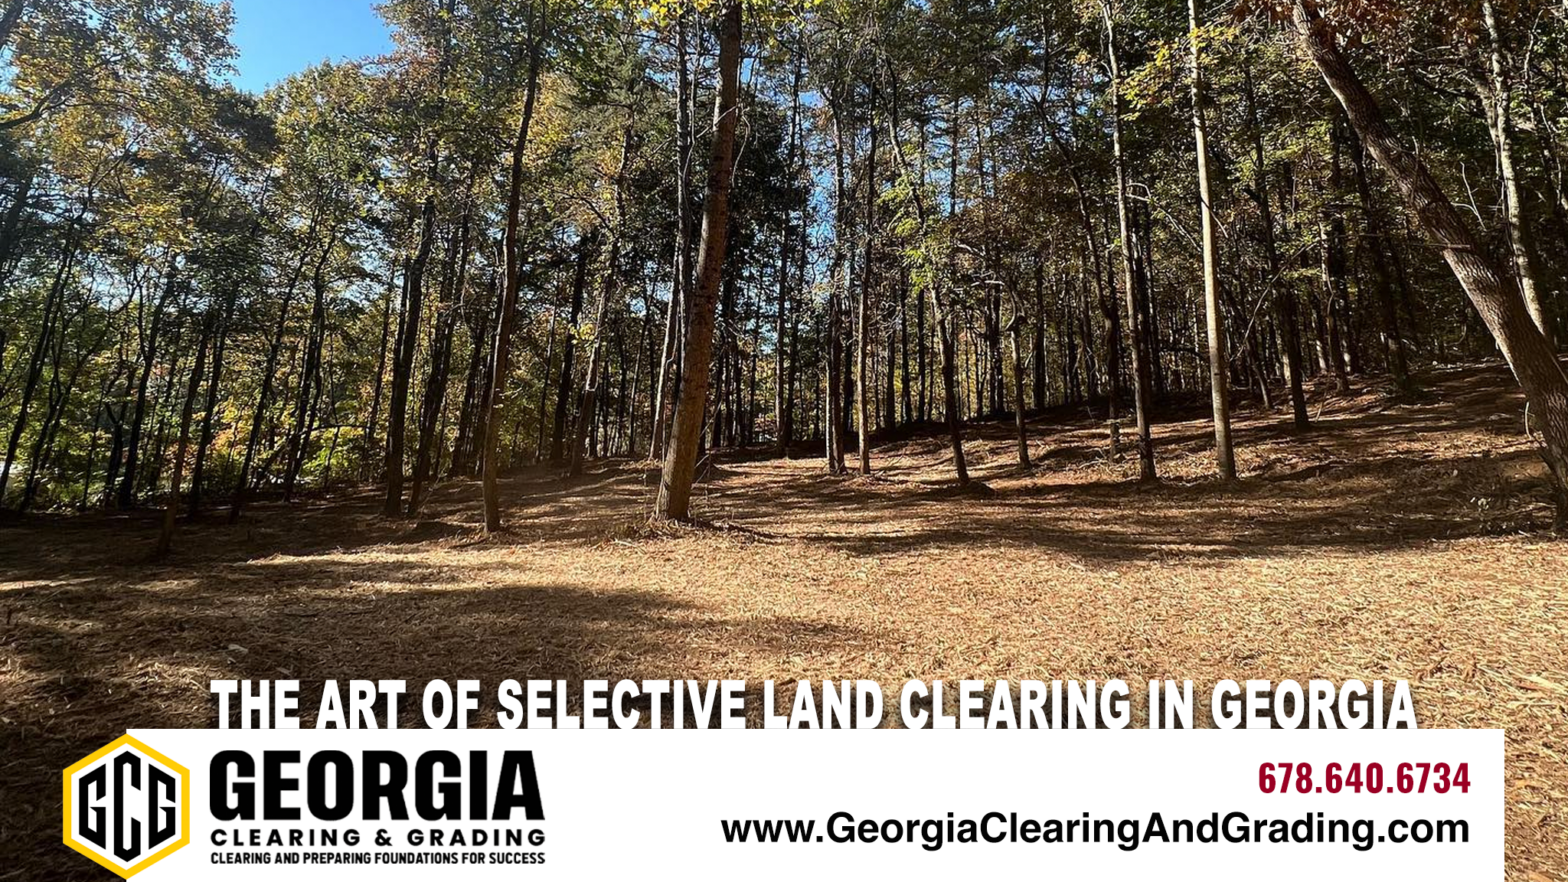 Selective Land Clearing and Site Development in Georgia